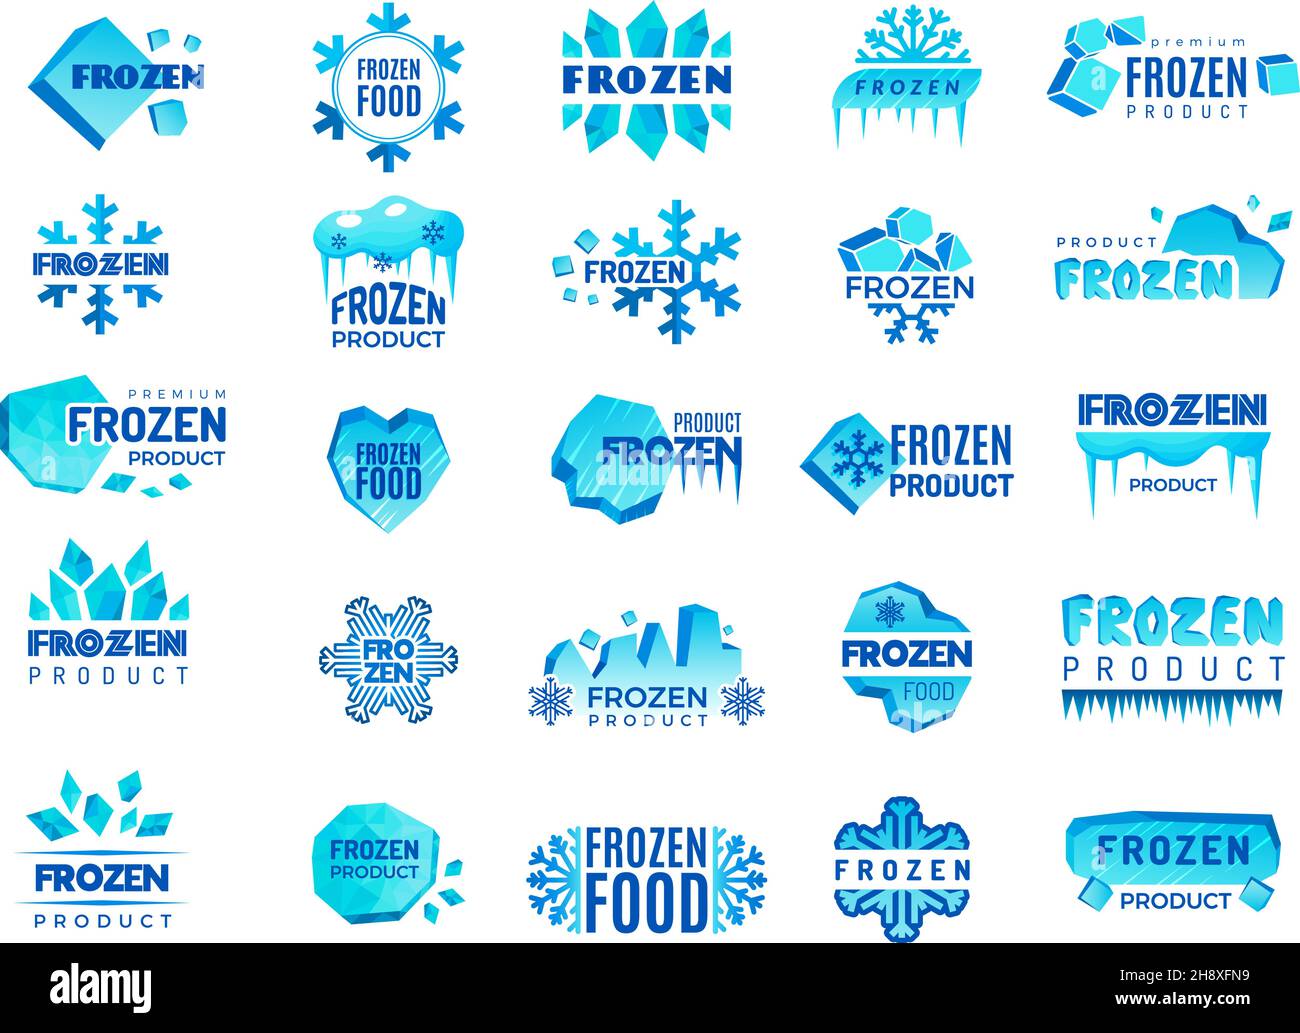 Frozen product logo. Snow and winter snowflakes from ice stylized symbols for logo design cold food temperatures recent vector templates collection Stock Vector